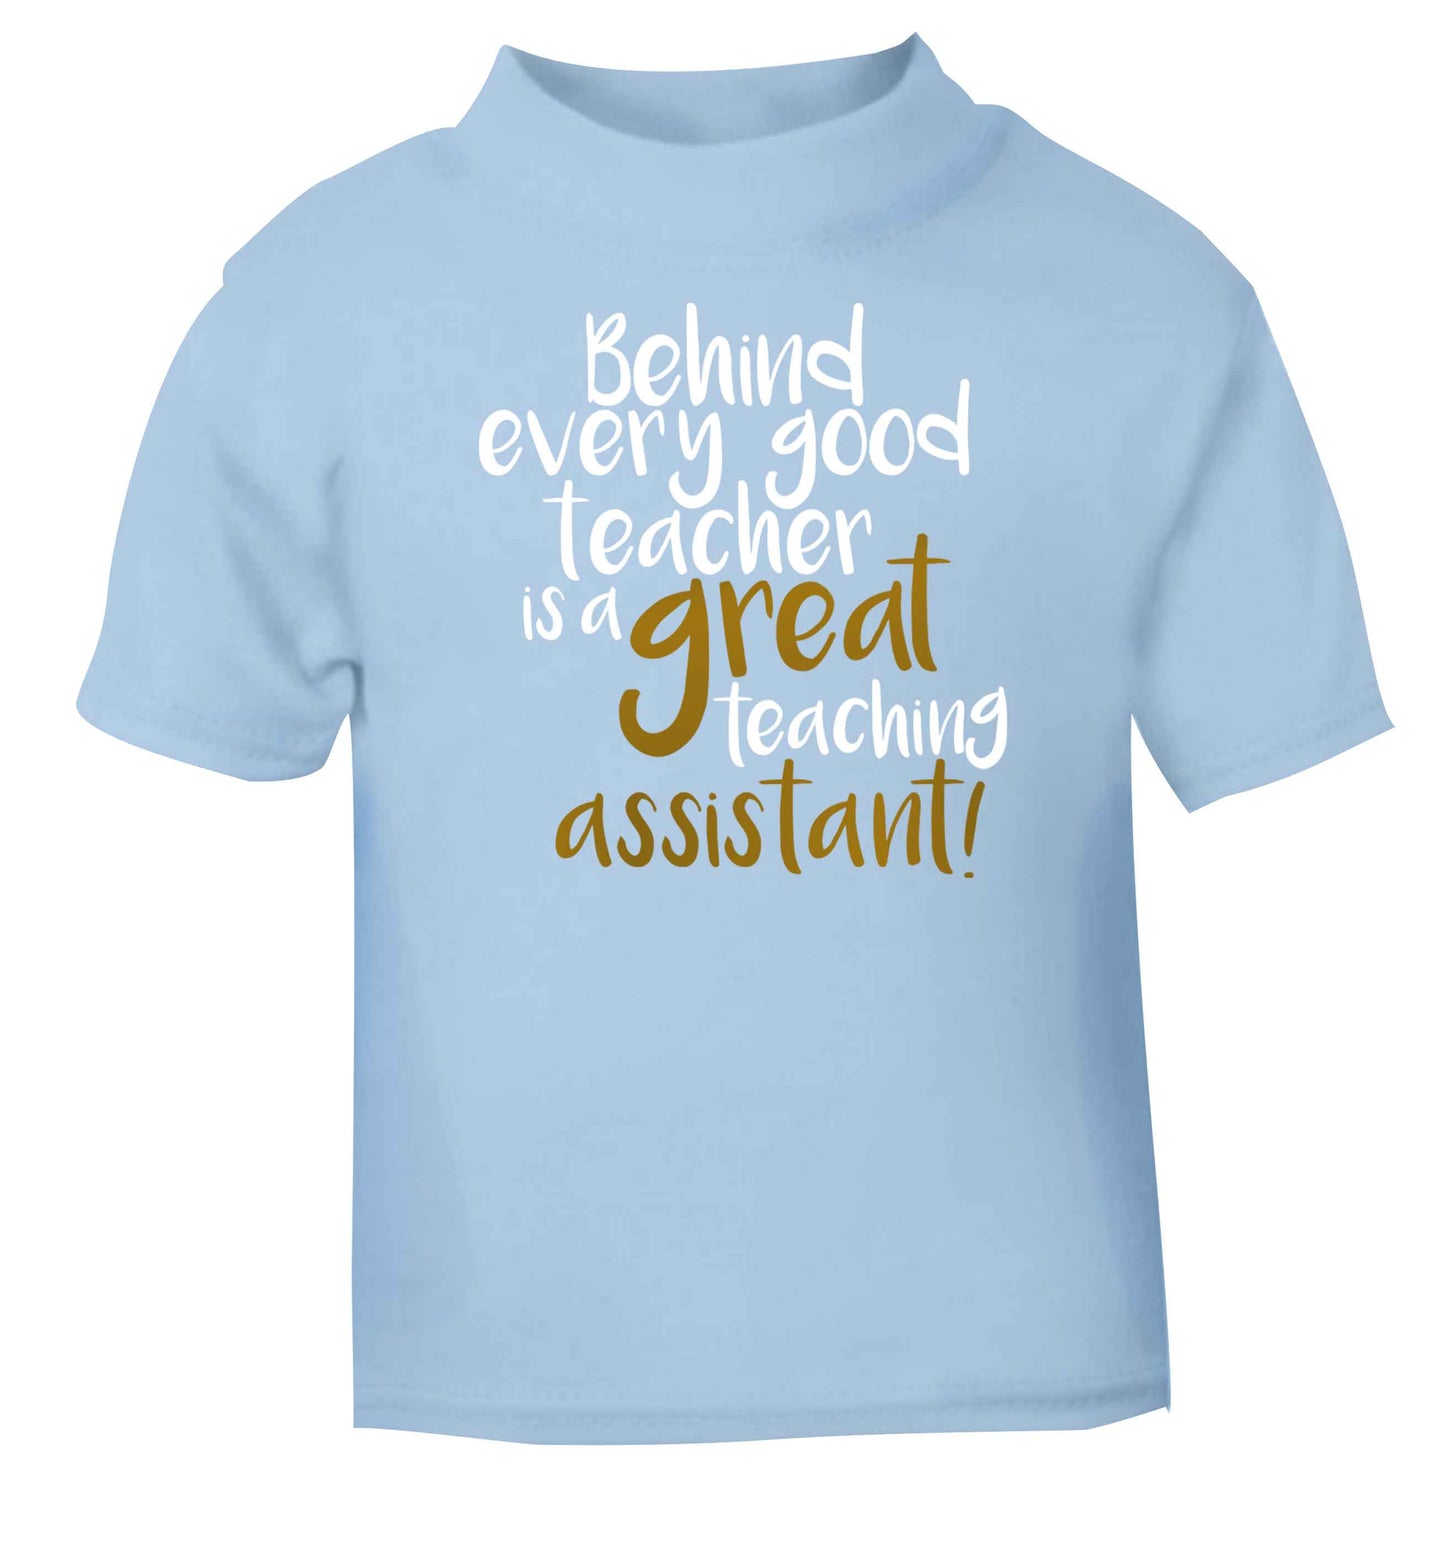 Behind every good teacher is a great teaching assistant light blue baby toddler Tshirt 2 Years